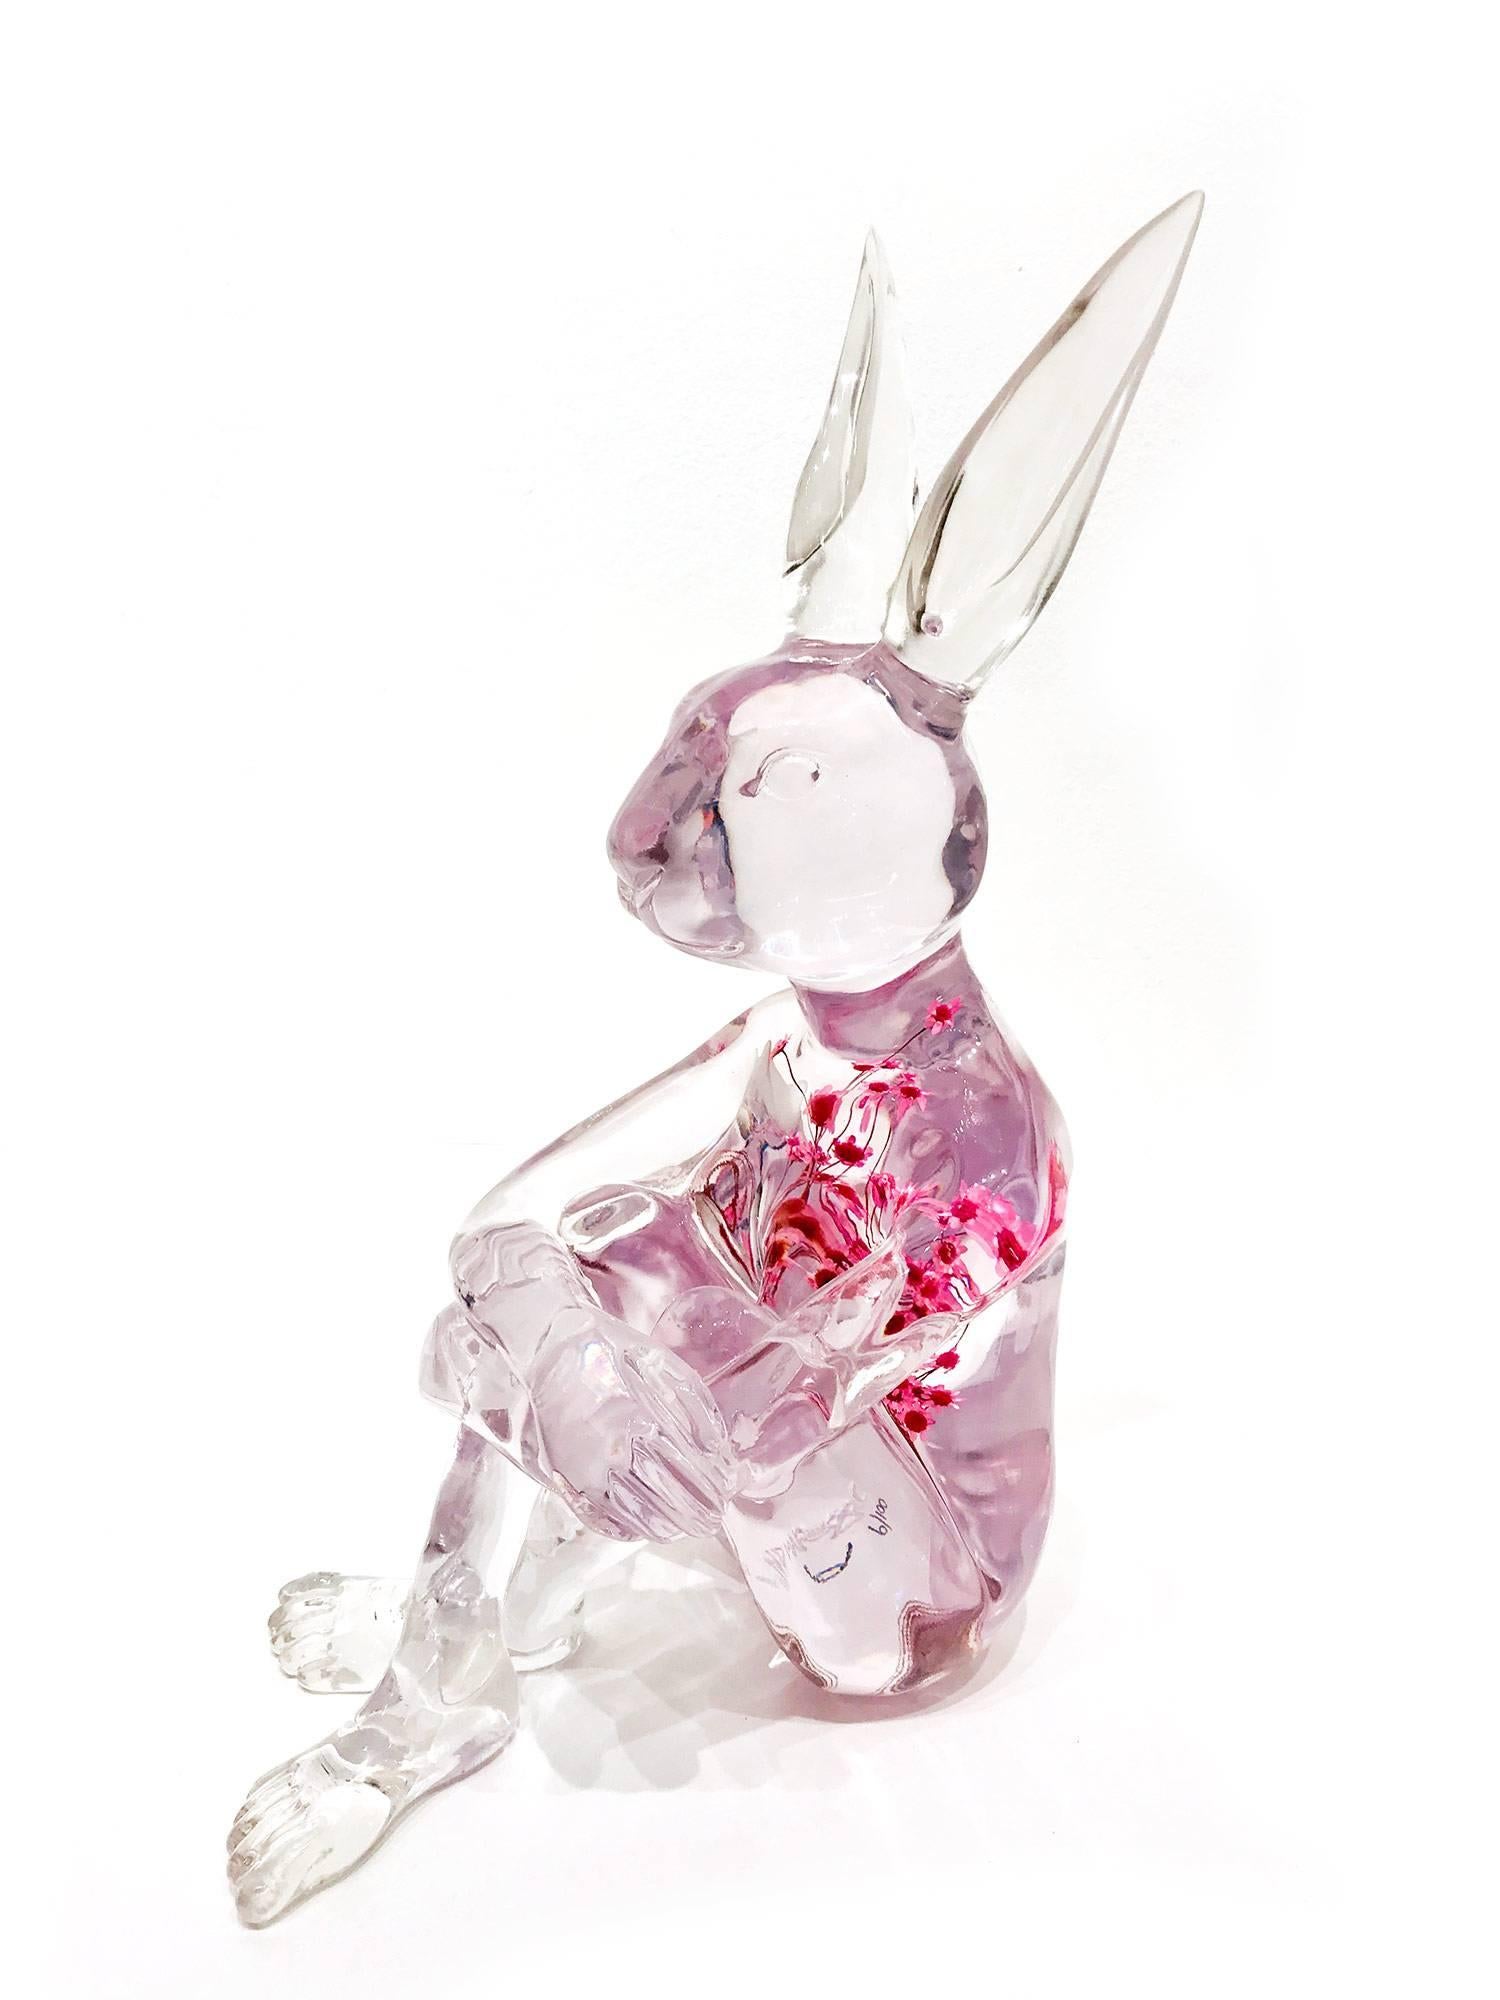 She Had Pure Thoughts with Pink Flowers - Gray Abstract Sculpture by Gillie and Marc Schattner